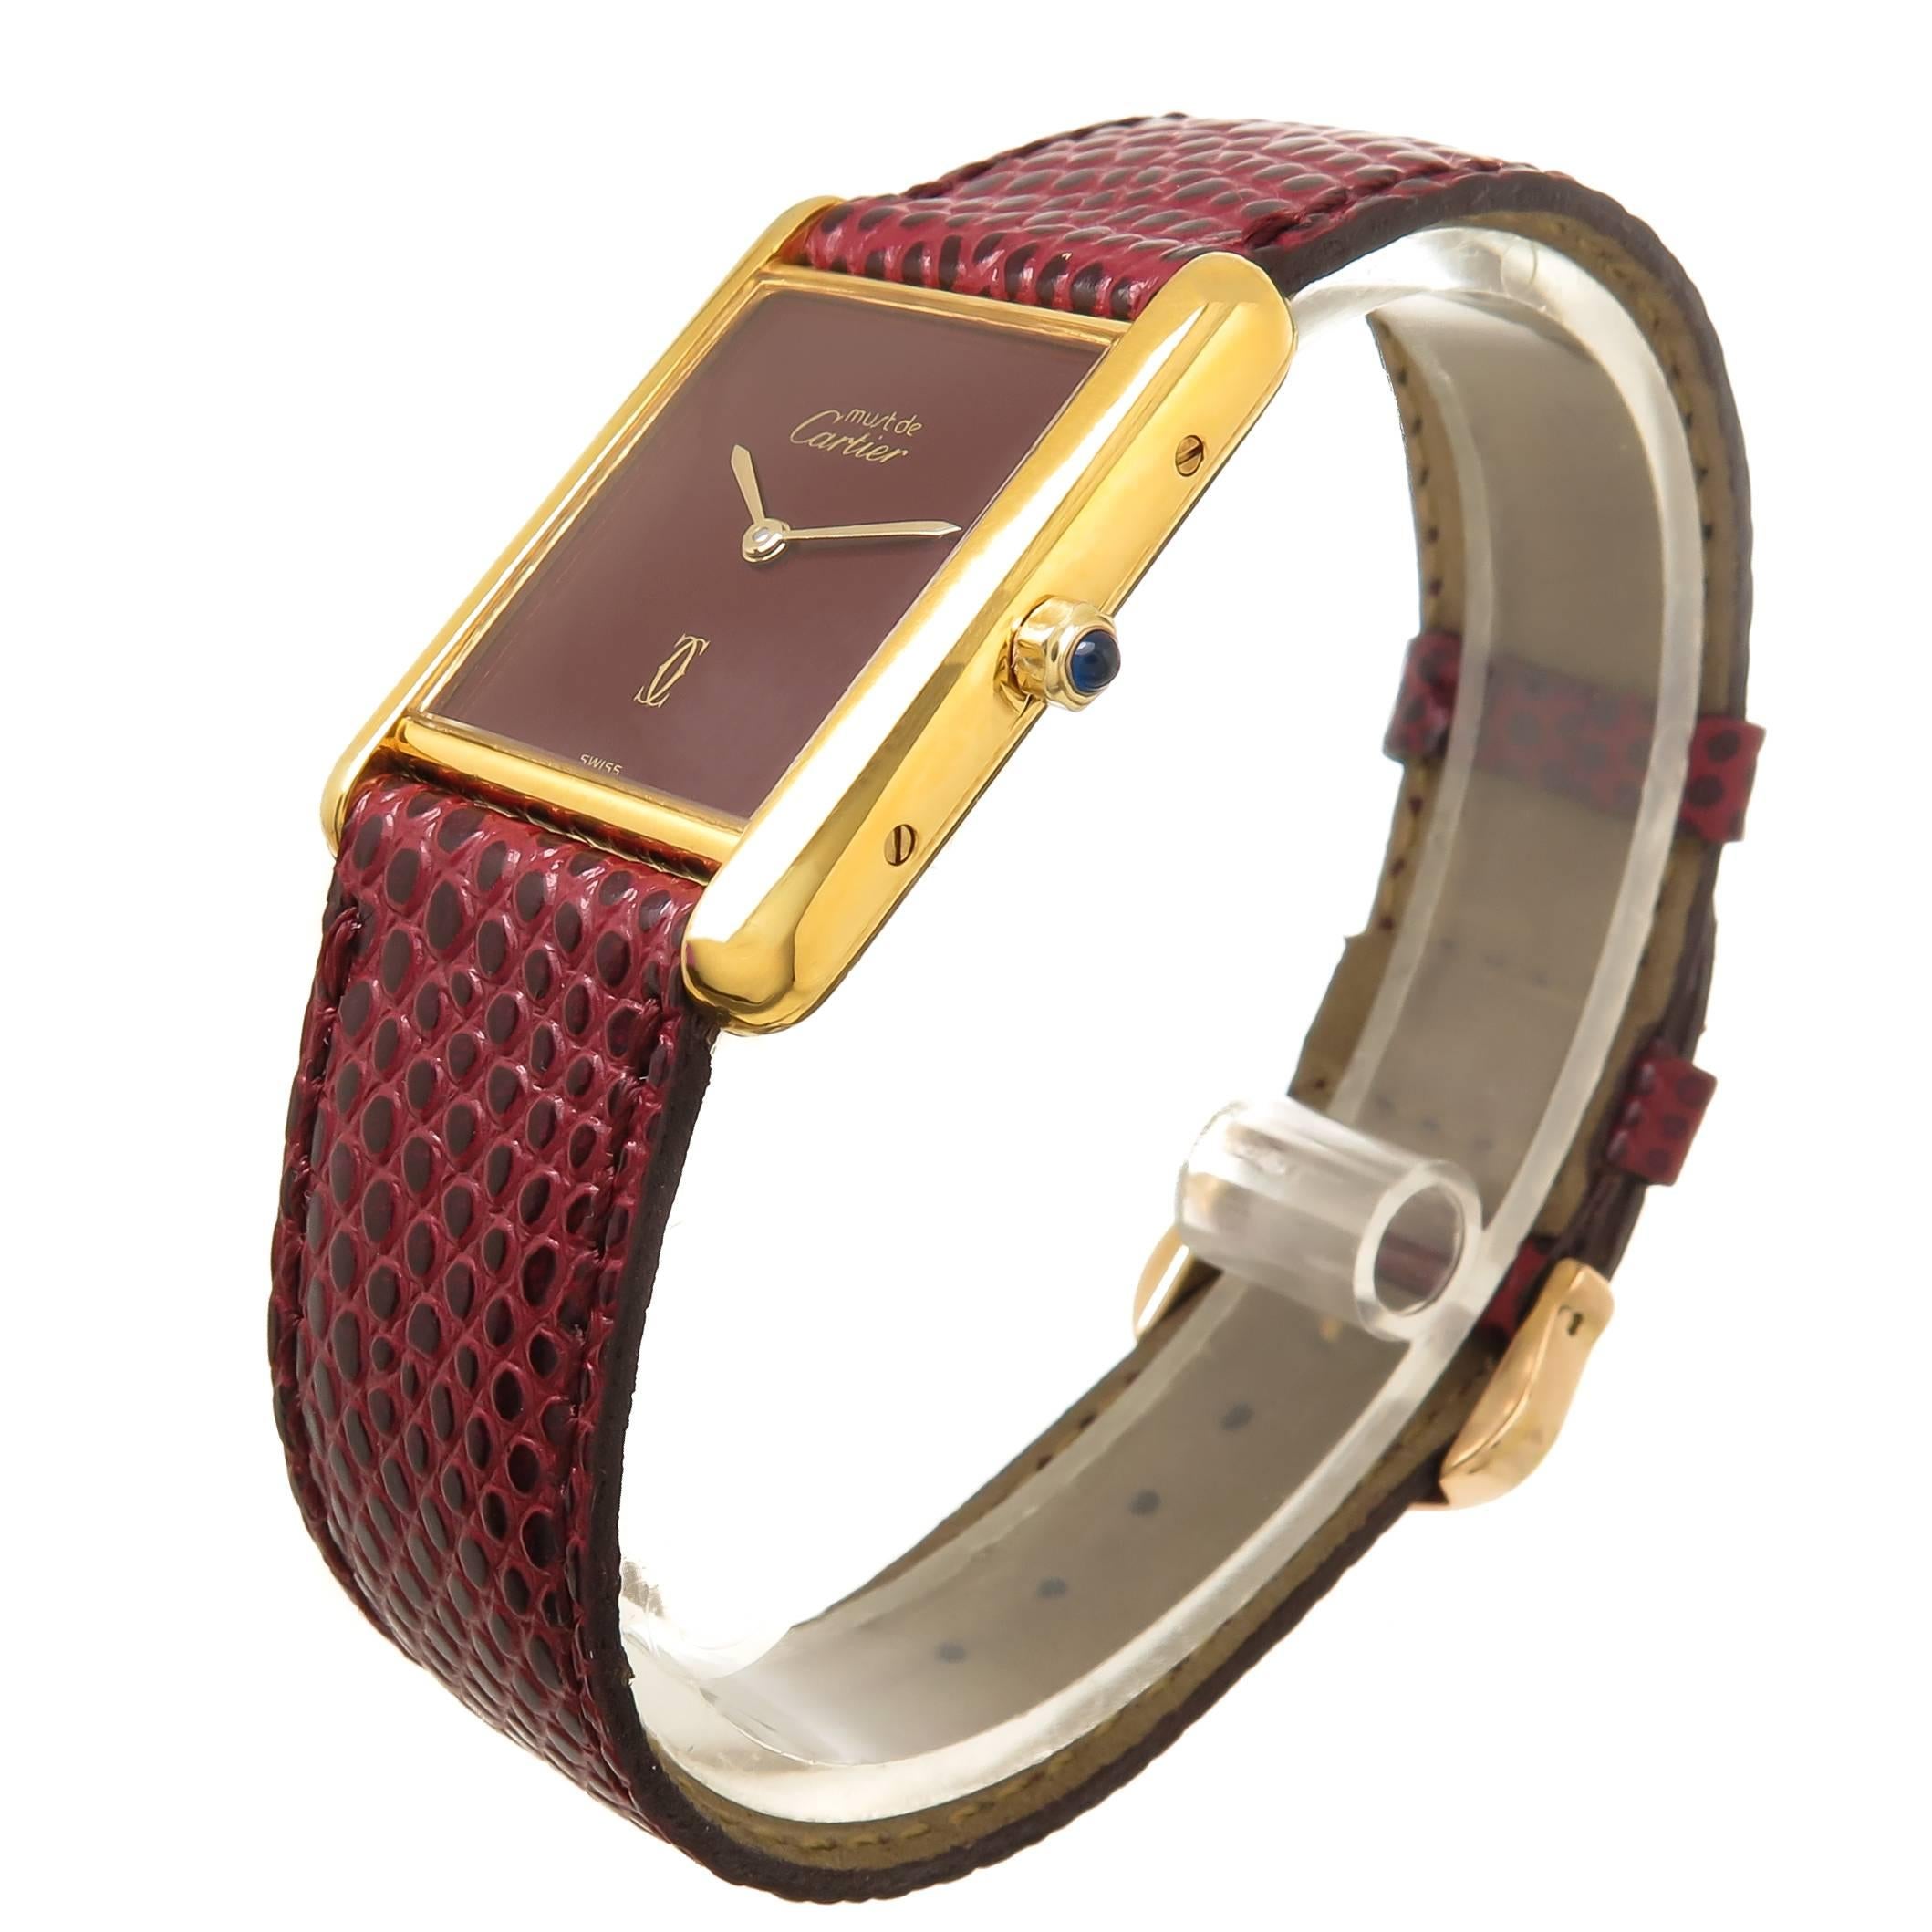 Circa 1990 Cartier Vermeil ( Gold Plate Sterling Silver ) Wrist watch, 30 X 24 M.M. Case, Quartz Movement, Burgundy Dial and a Sapphire Crown. New Burgundy Lizard strap with original Cartier Gold Plate Tang buckle. Watch length 8 1/2 inches.